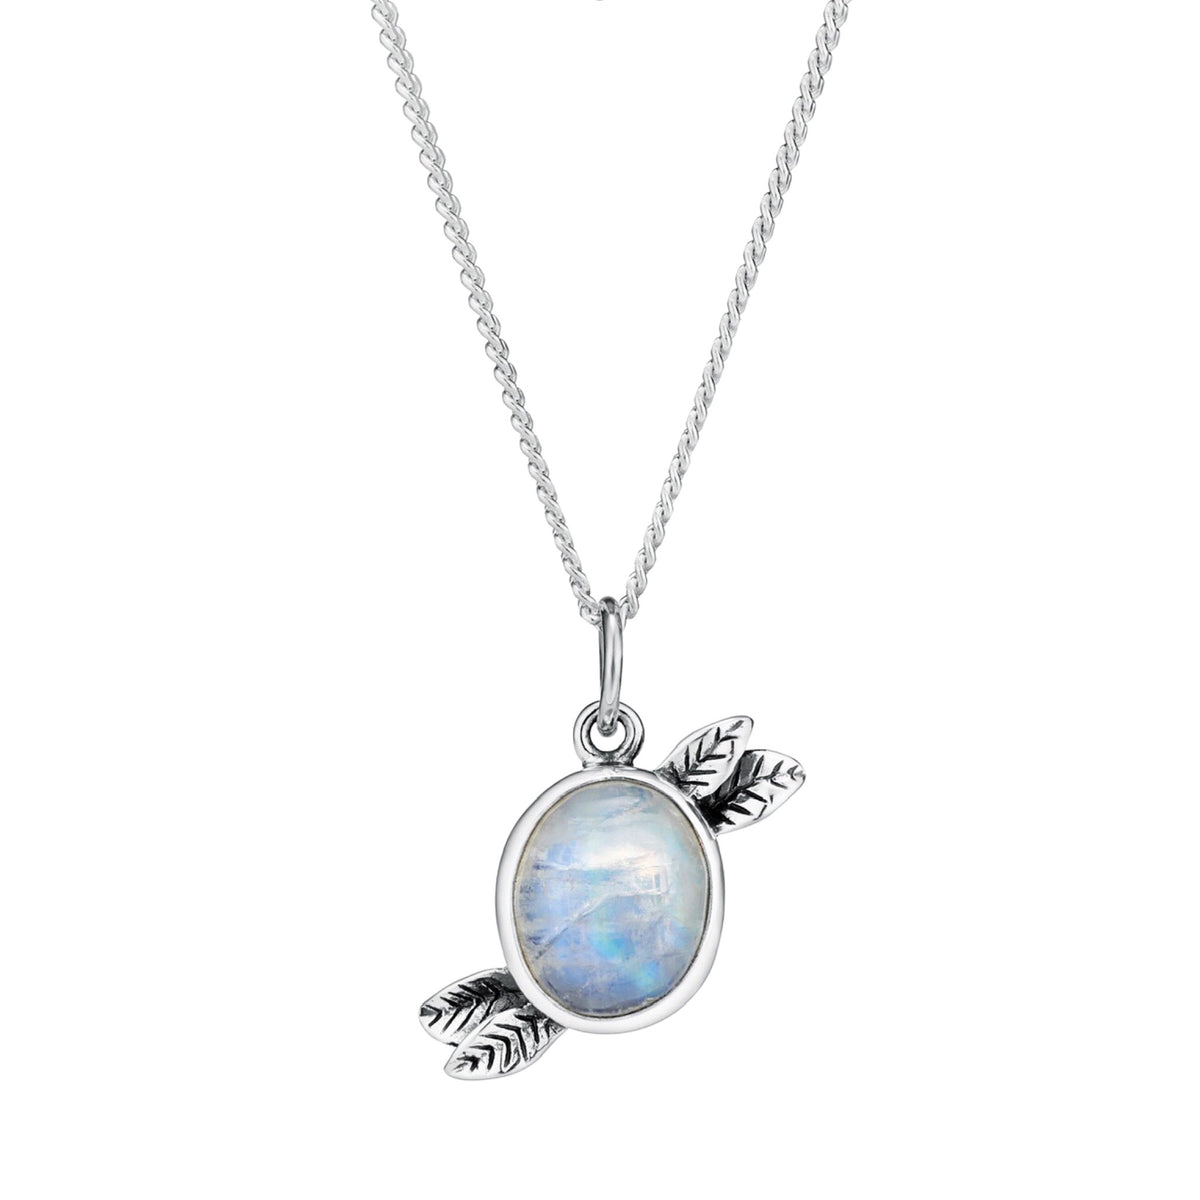 EVERGREEN - Moonstone & Sterling Silver Necklace